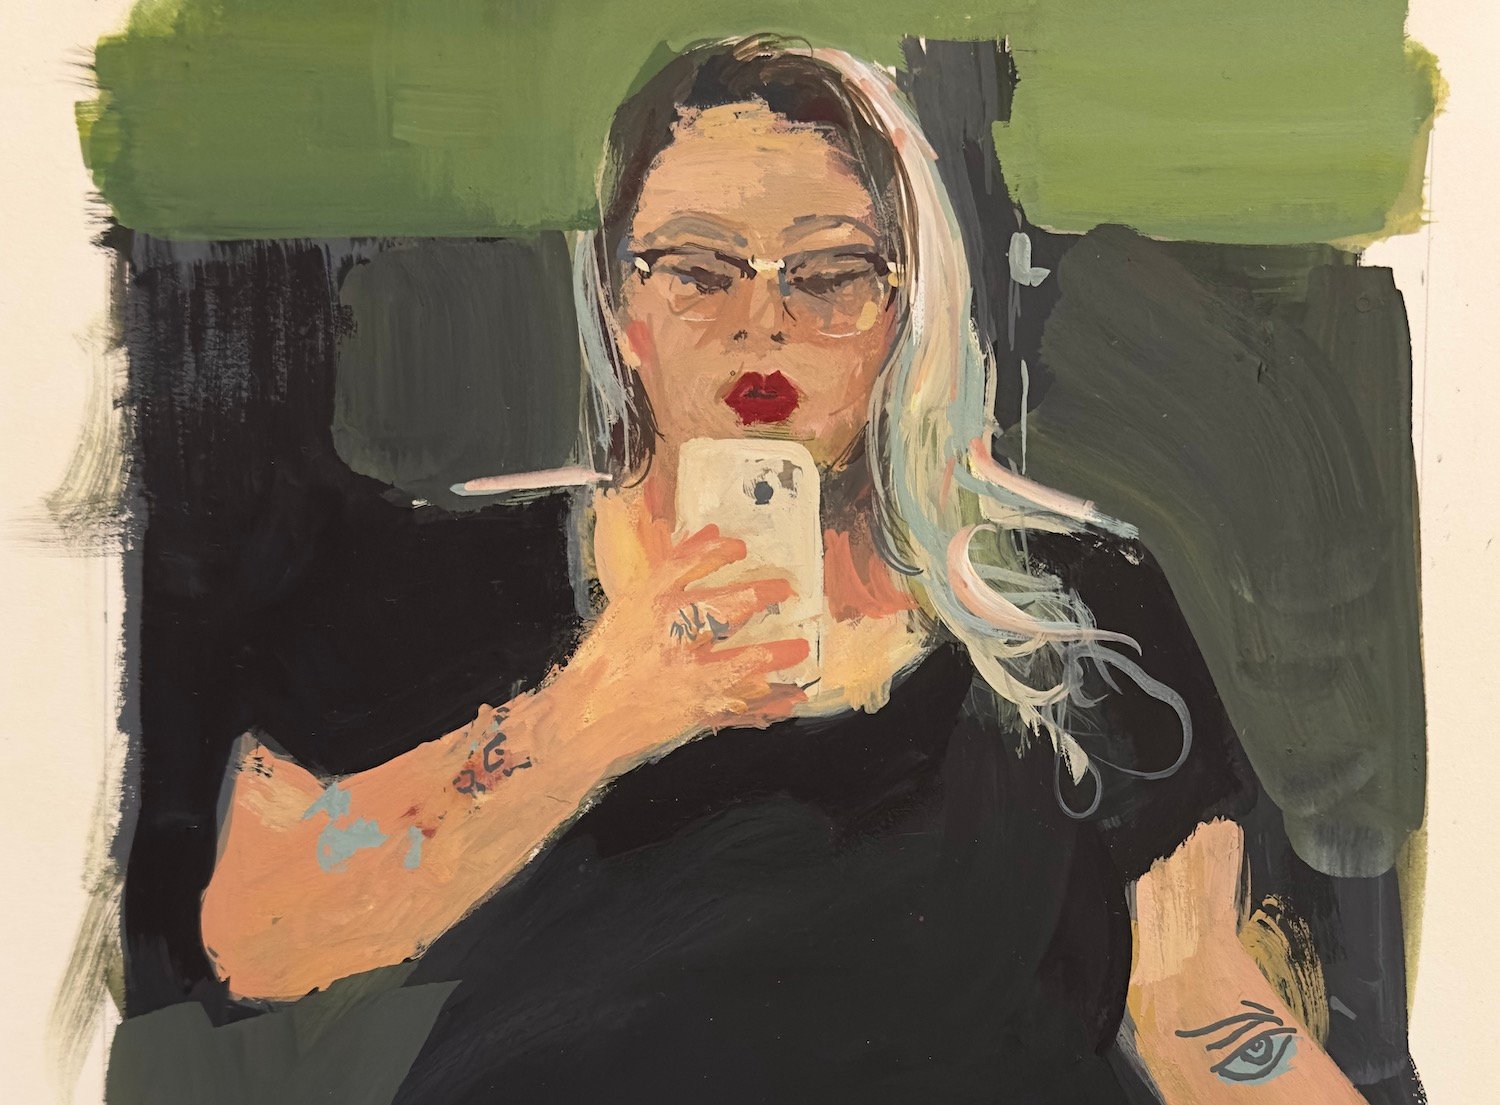 Painting by Noah Saterstrom of San Diego Magazine contributor Katy Stegall featuring her taking a selfie and reflecting on the weight of poverty